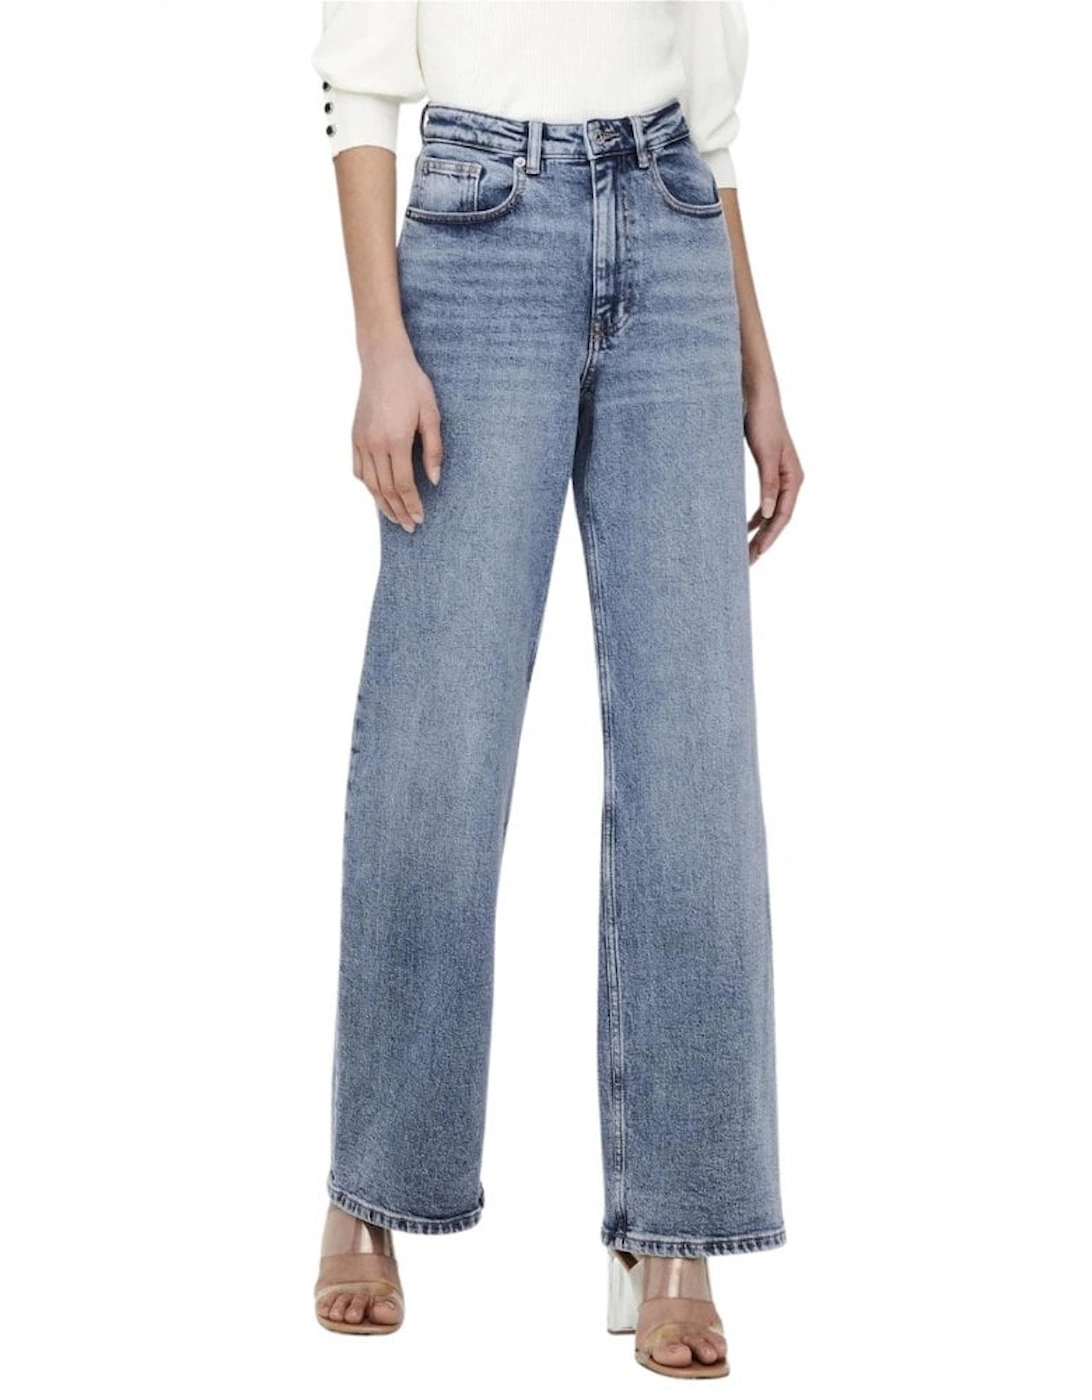 Juicy Life Wide High Waisted Jeans - Blue Denim, 9 of 8